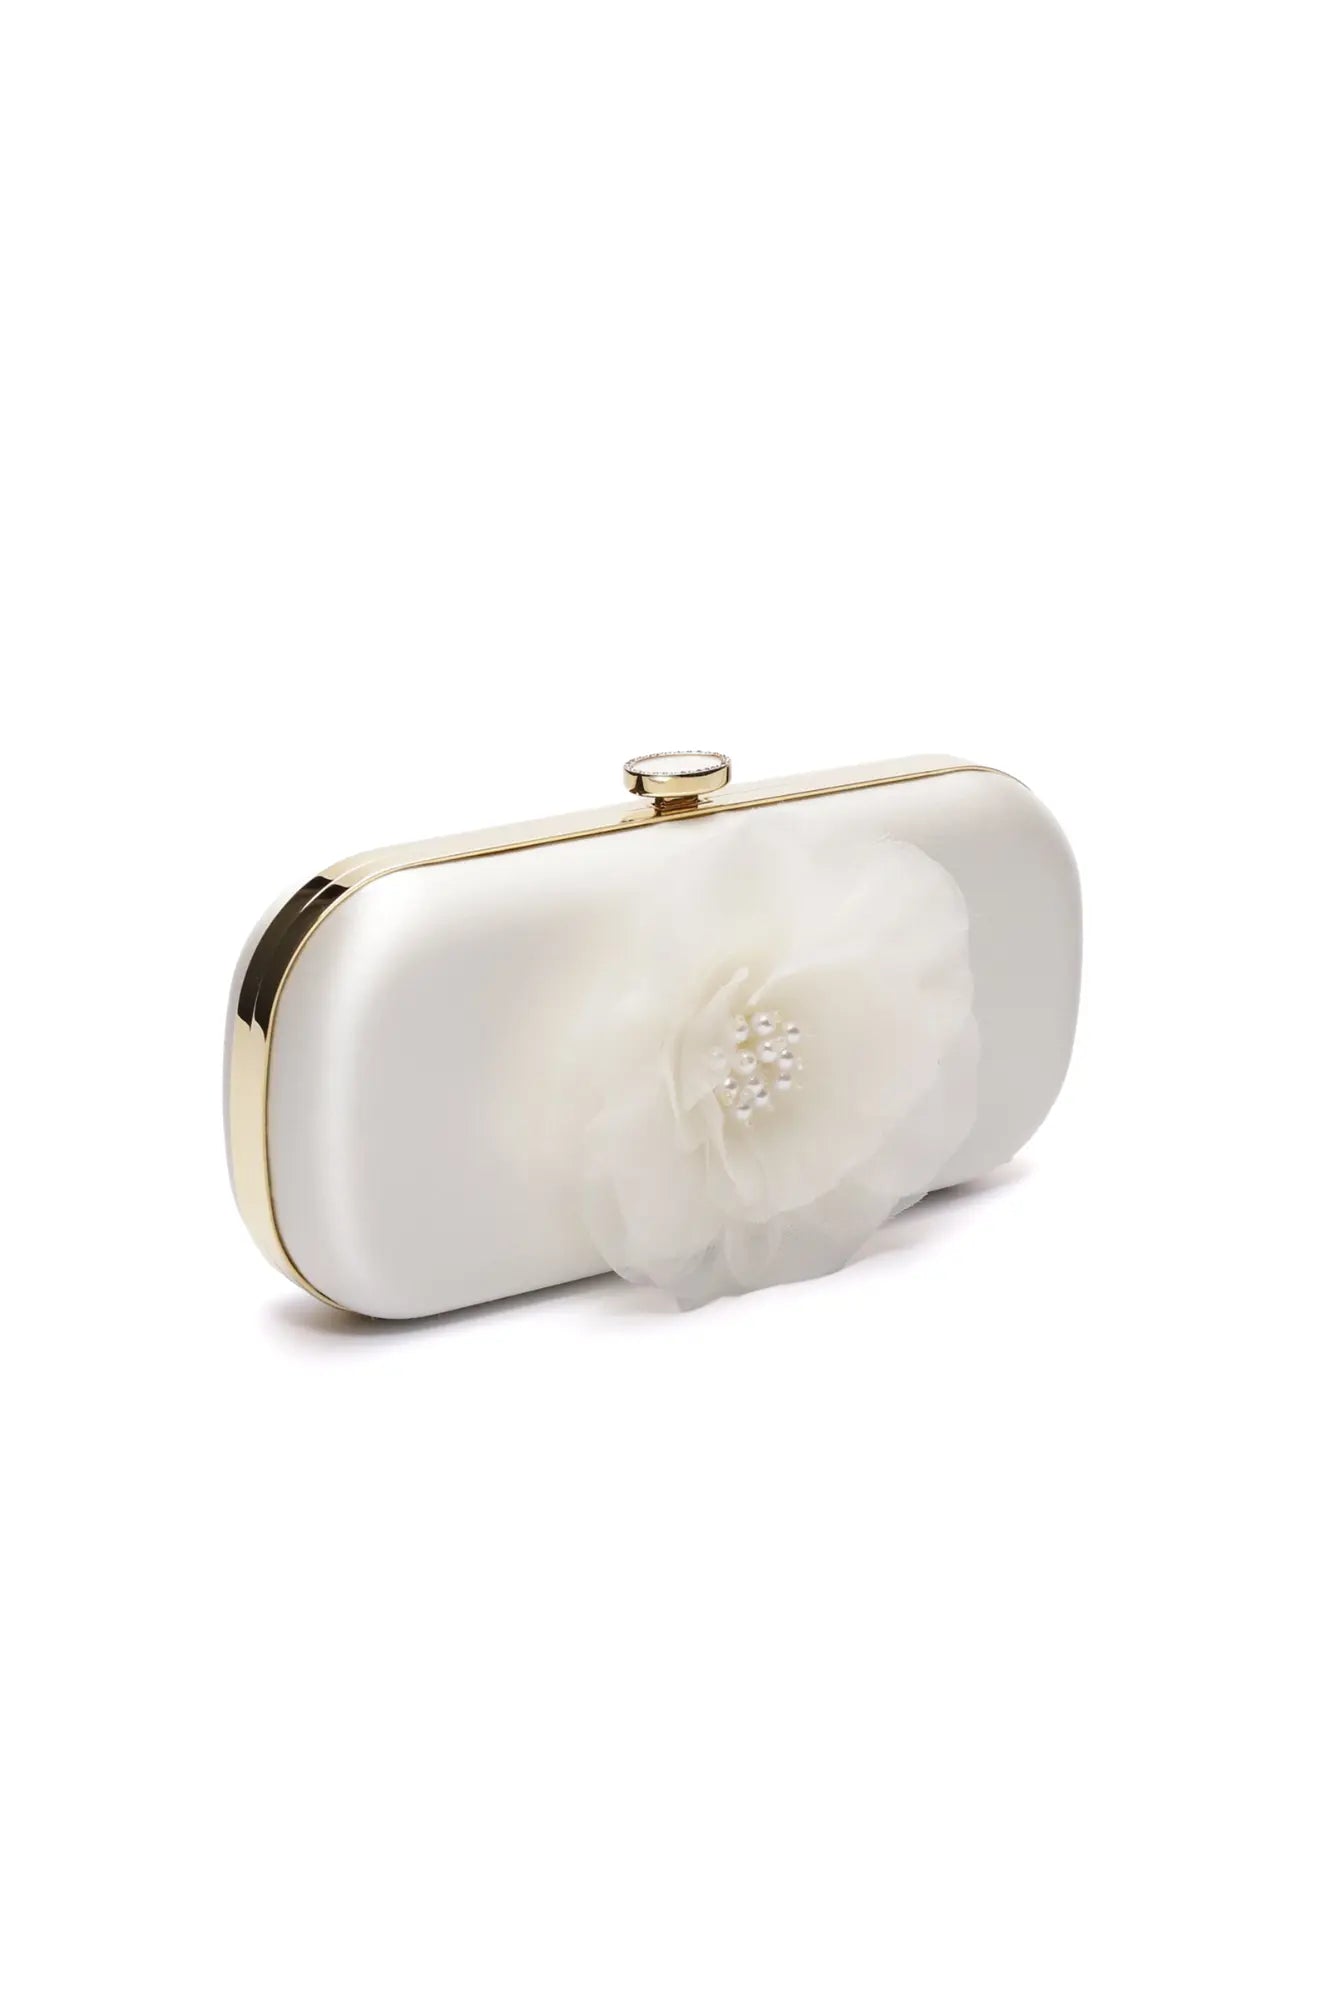 Bella Fiori Clutch Ivory Grande from The Bella Rosa Collection, with floral embellishment and gold accents, perfect for black-tie events.